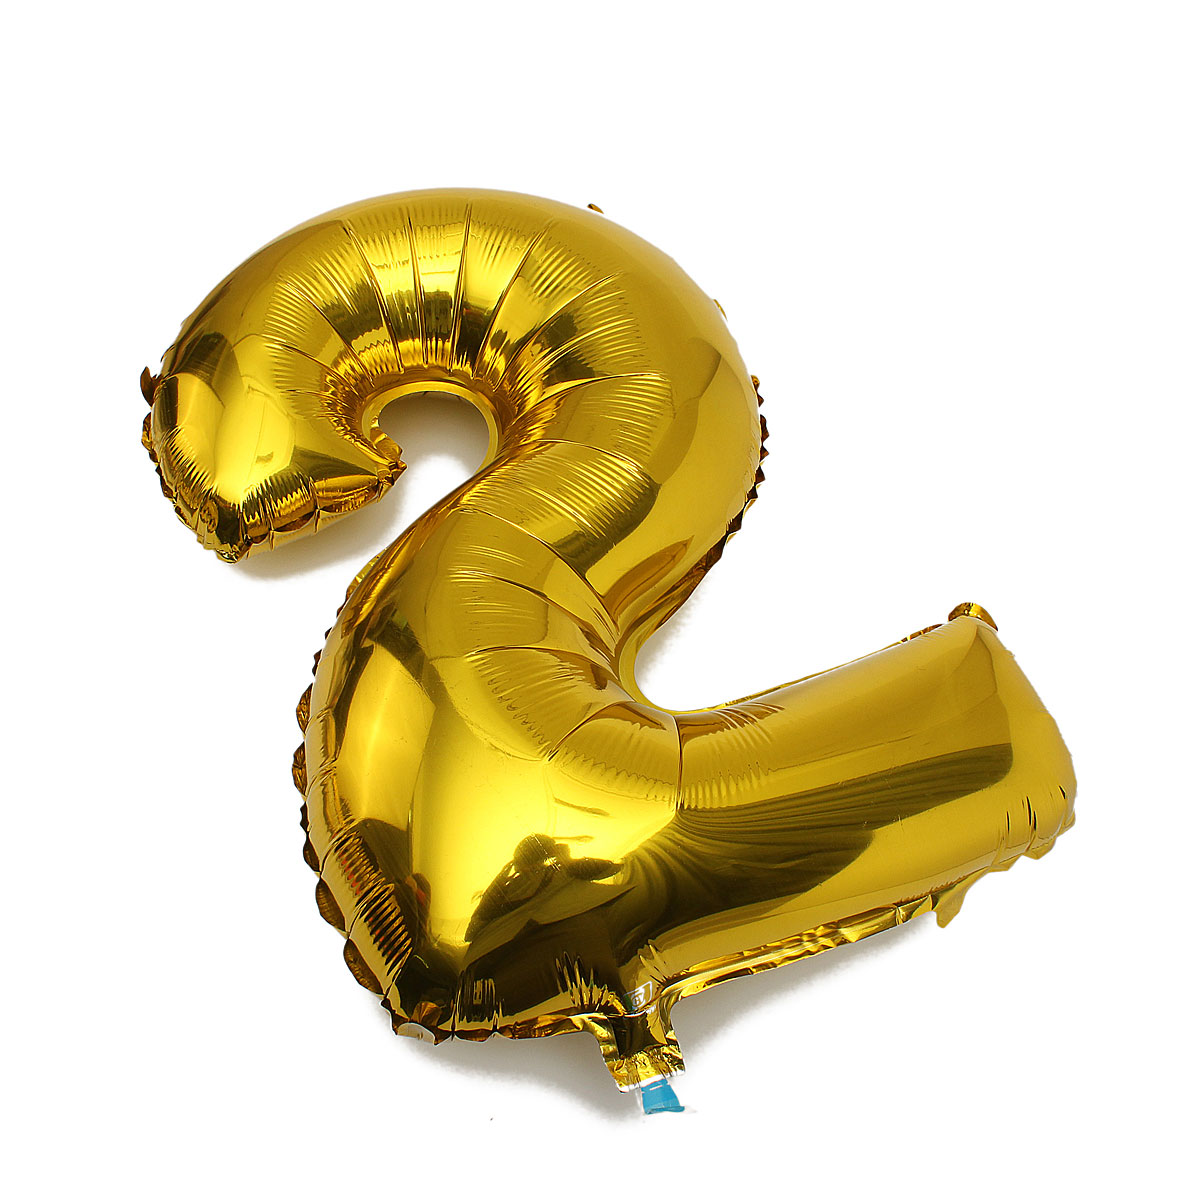 Gold-Silver-Number-Foil-Balloon-Wedding-Birthday-Party-Decoration-971829-4